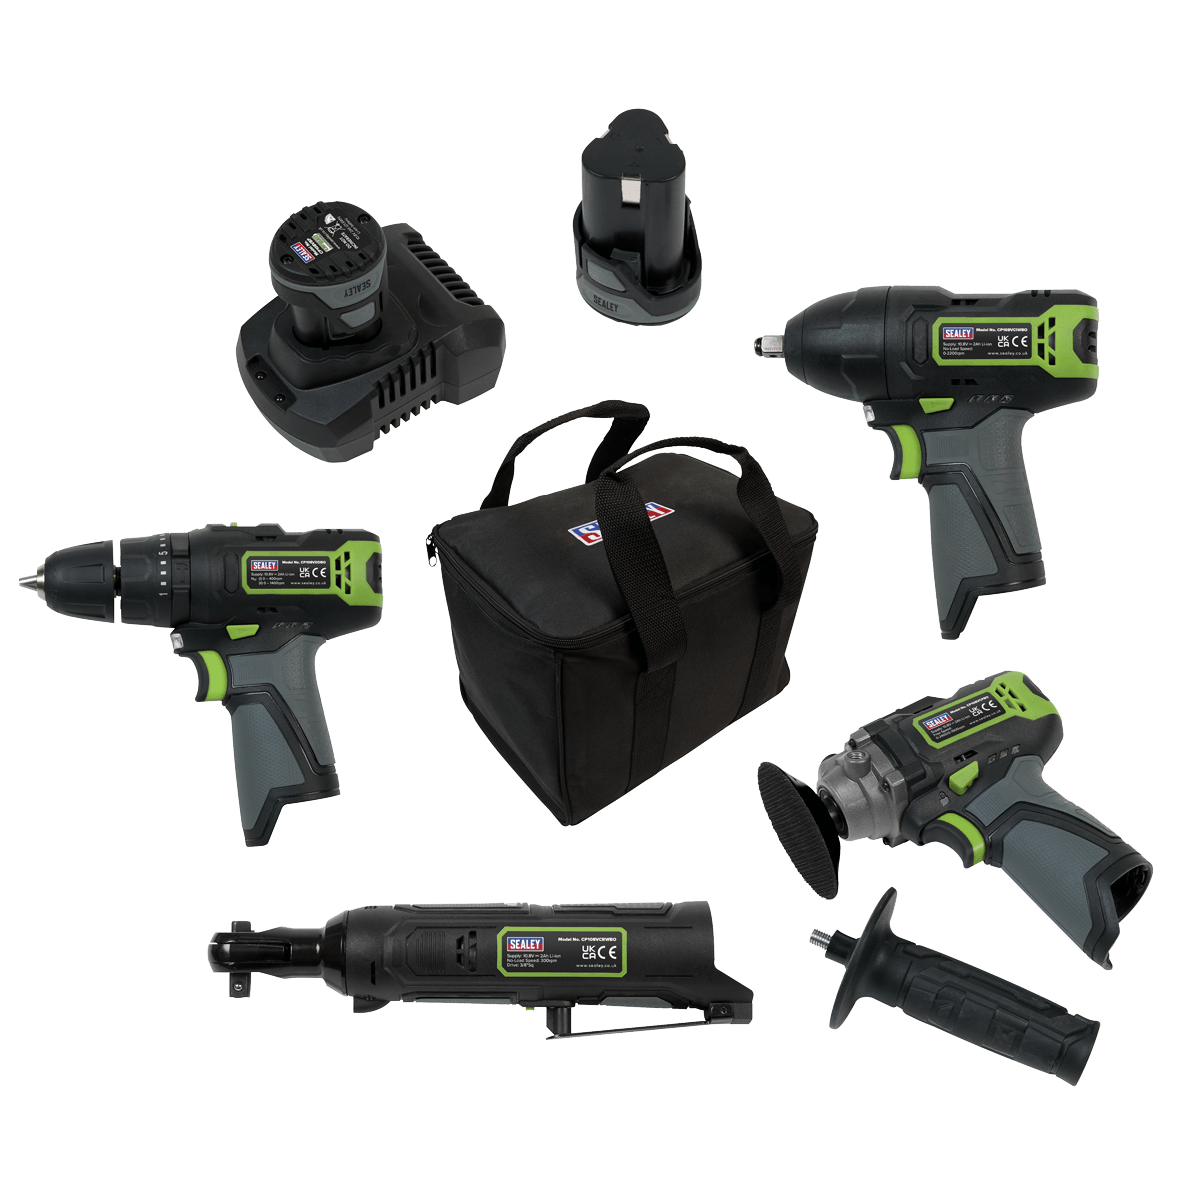 Sealey 4 x 10.8V SV10.8 Series Cordless Combo Kit - 2 Batteries - Drill, Ratchet & Impact Wrench, Polisher CP108VCOMBO1 - Tools 2U Direct SW